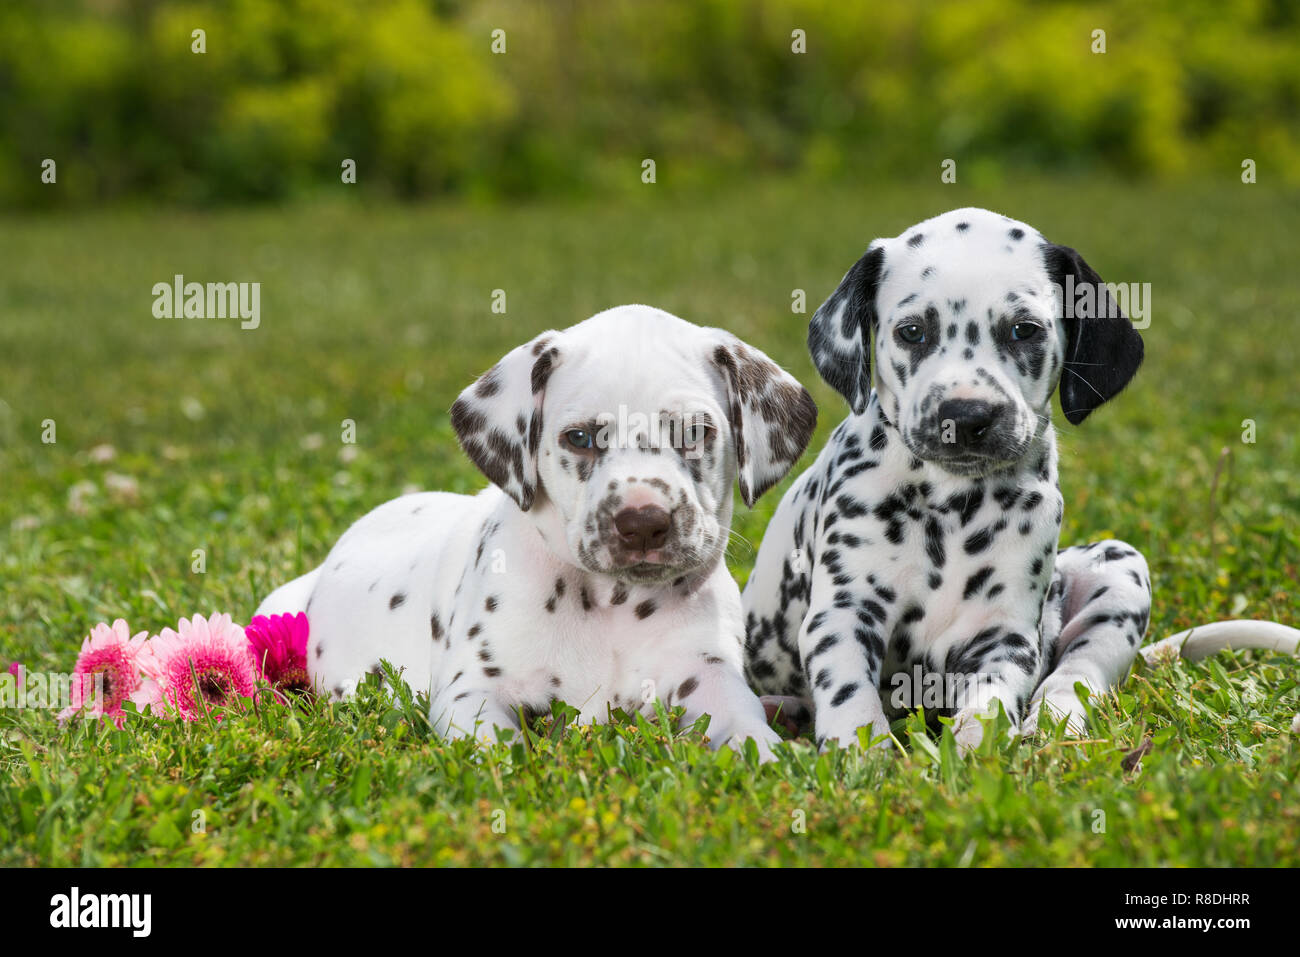 Dalmatian puppies lying on a meadow Stock Photo